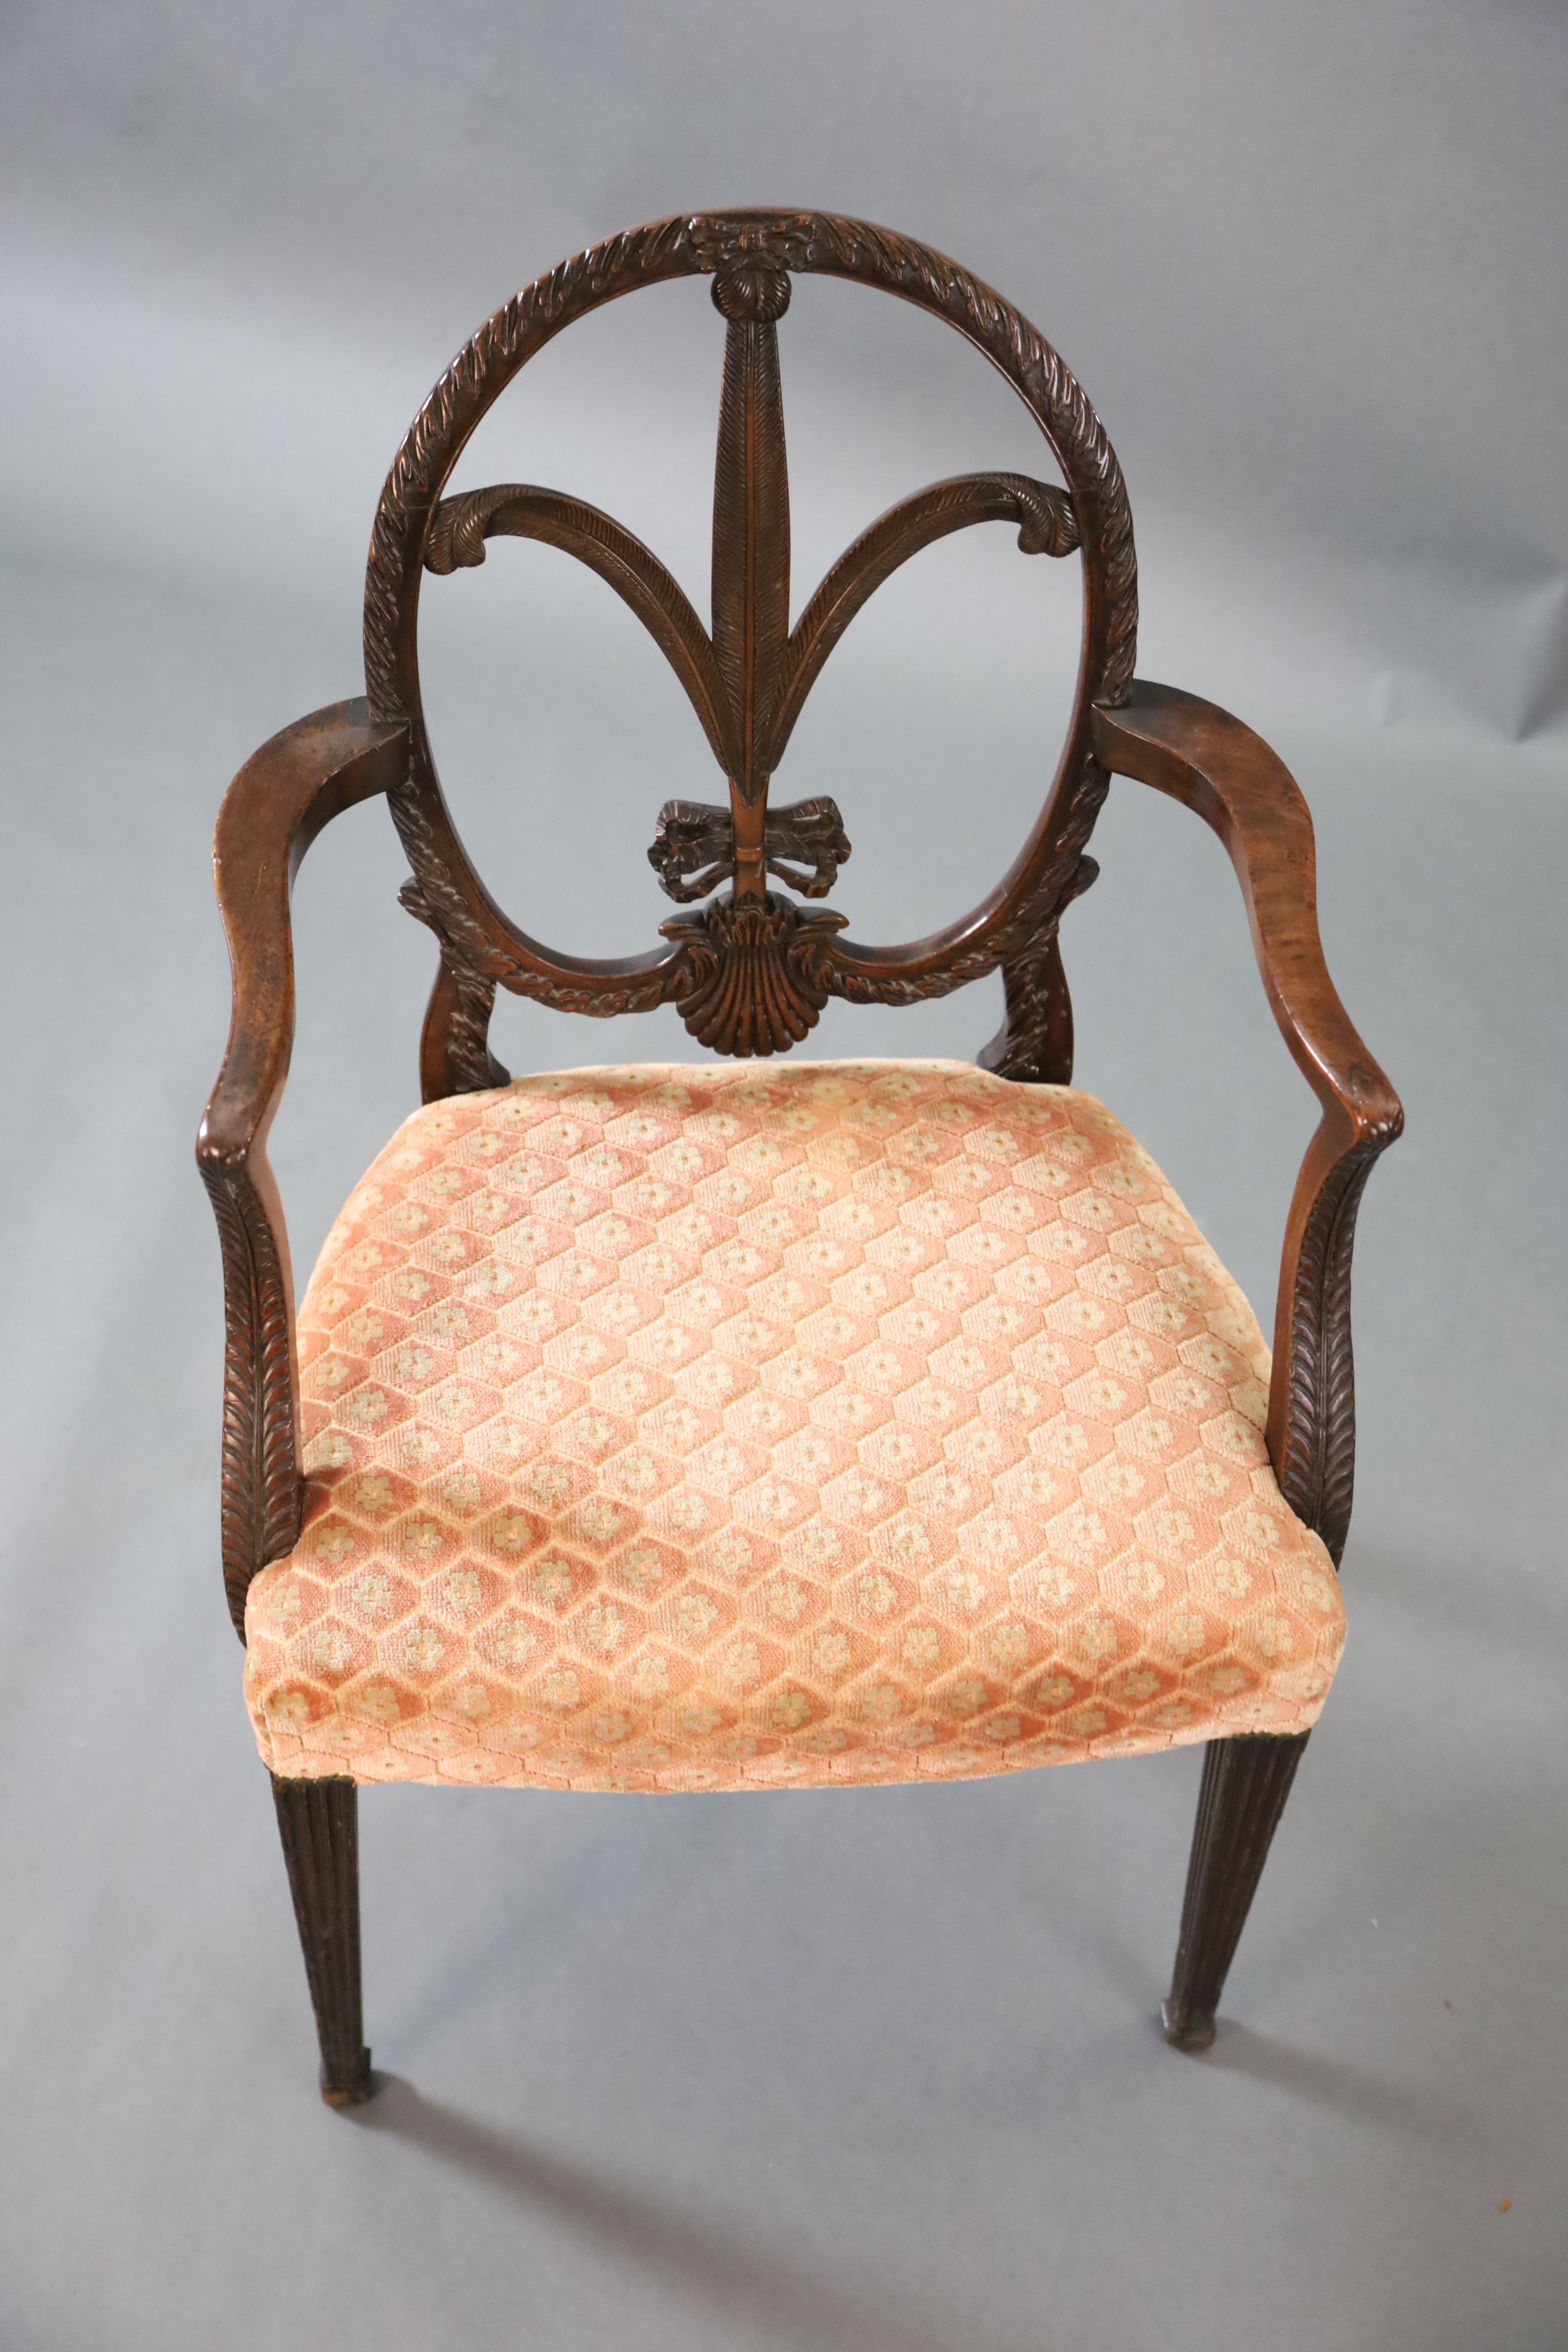 A George III Hepplewhite style mahogany elbow chair, W.1ft 10in. D.1ft 8in. H.3ft 1in.